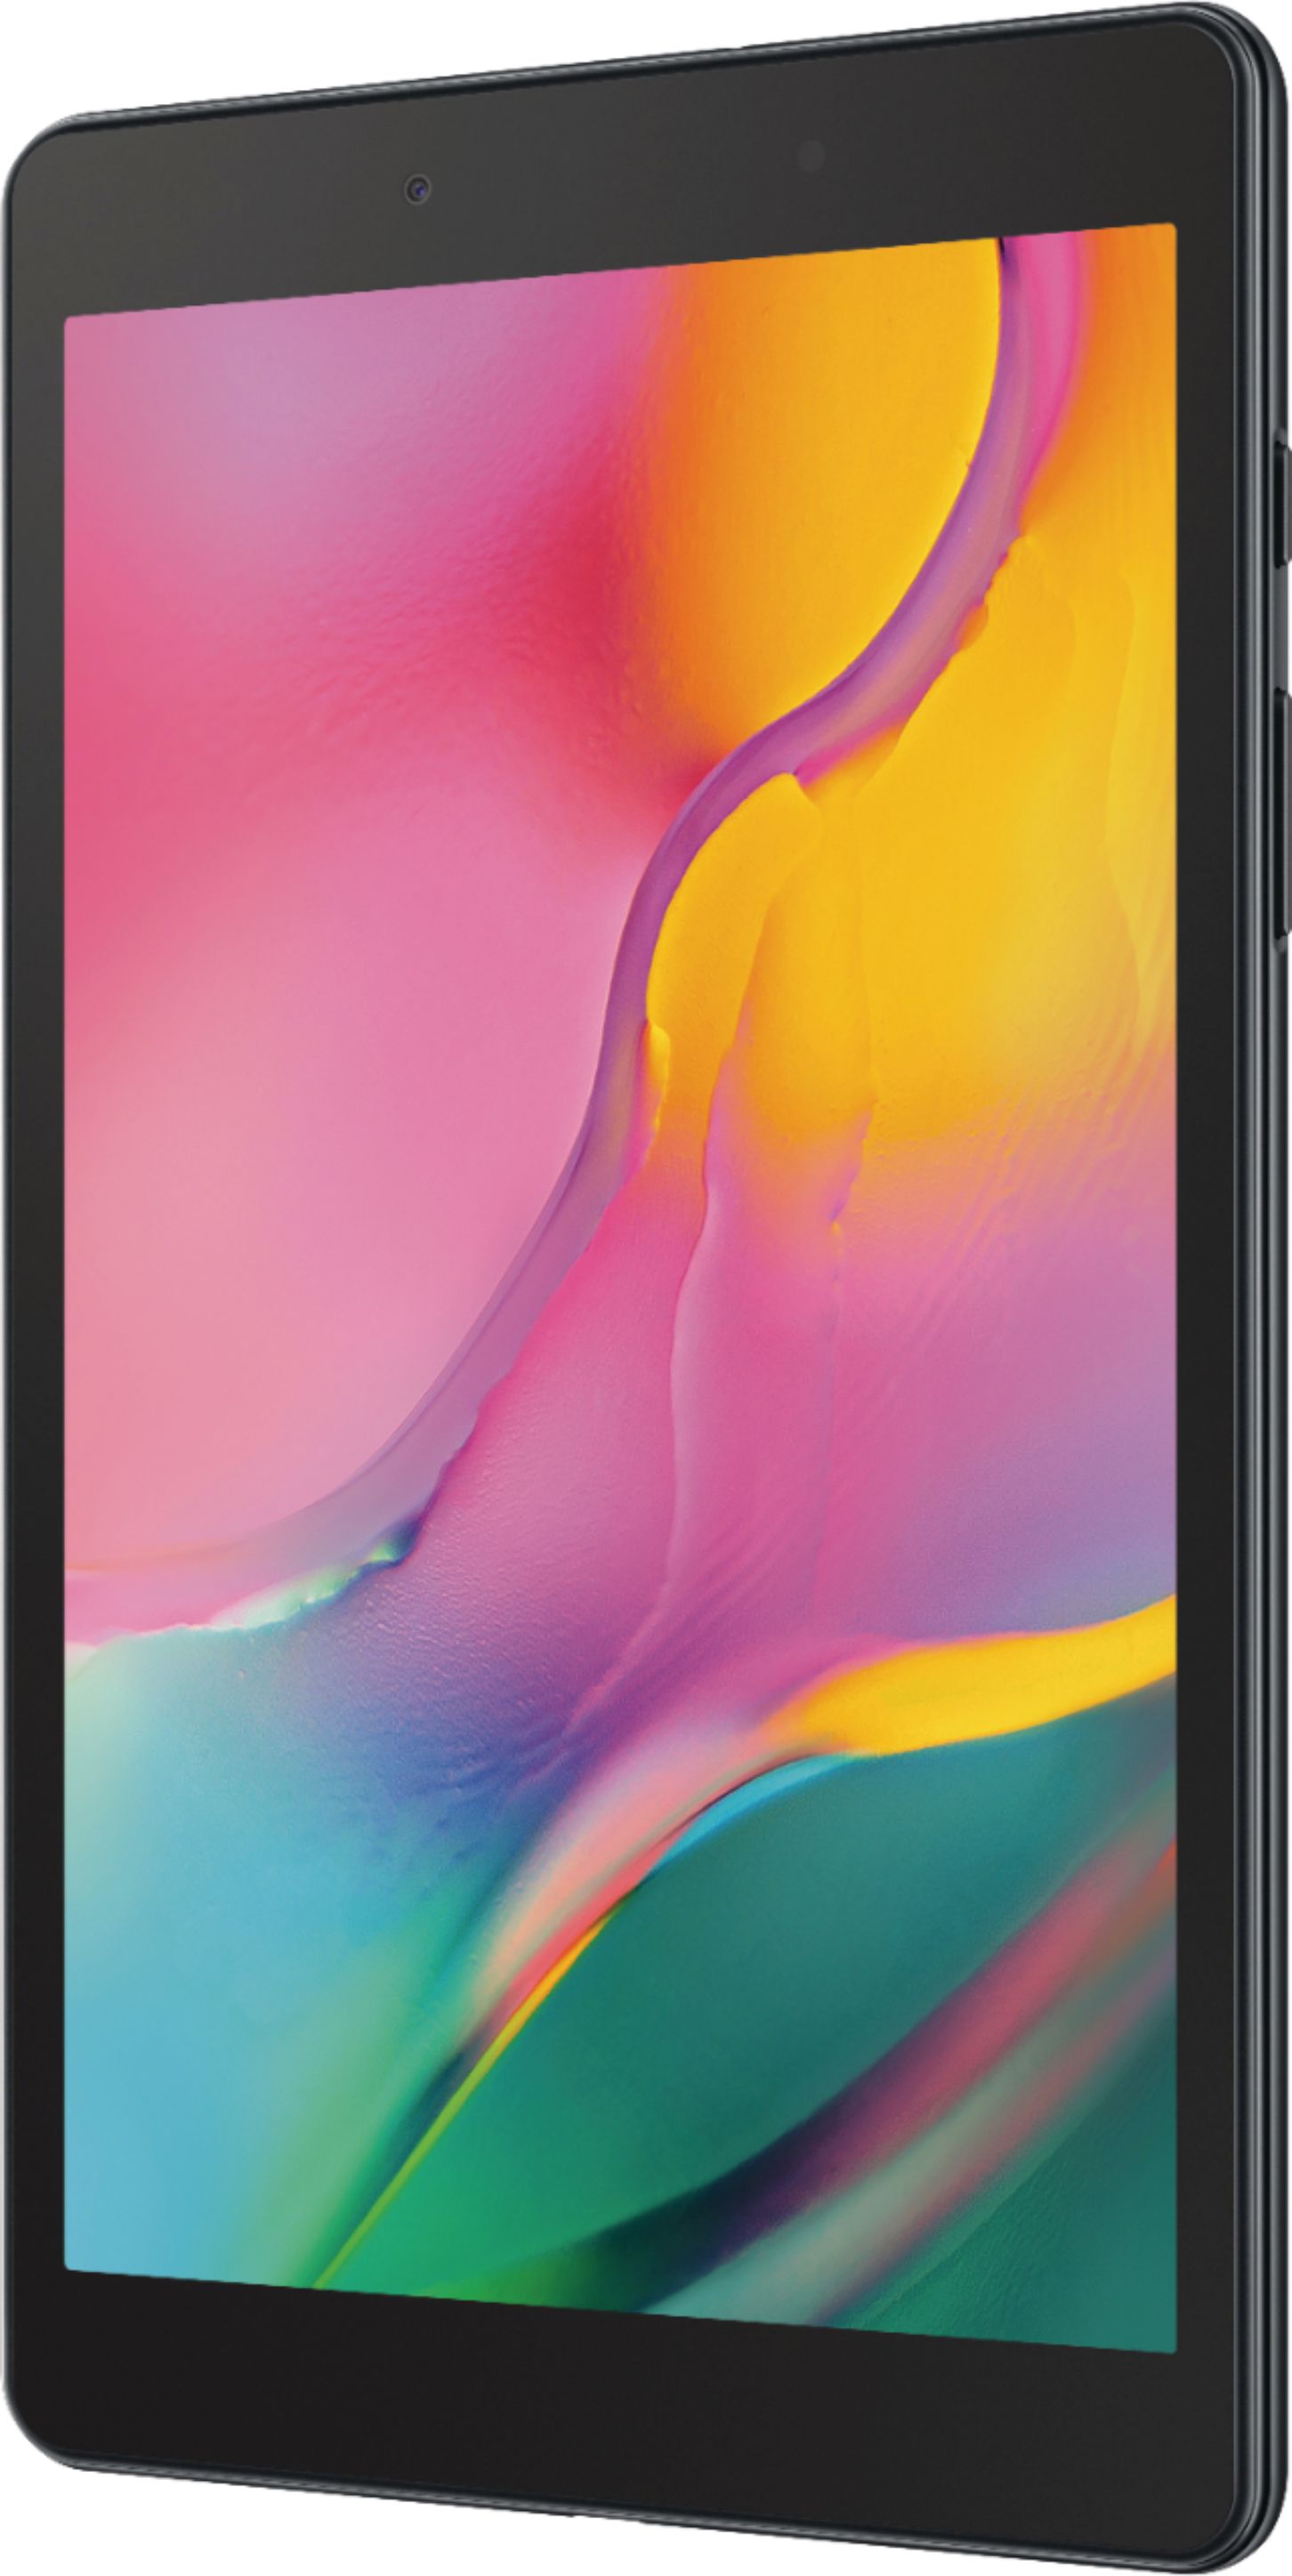 and Built for Lifetime of Constant Use! 2019 MIXZA Performance Grade 32GB Verified for Samsung Galaxy Tab A 8.0 UHS-I3.080MBs MicroSDHC Card is Pro-Speed Heat & Cold Resistant 